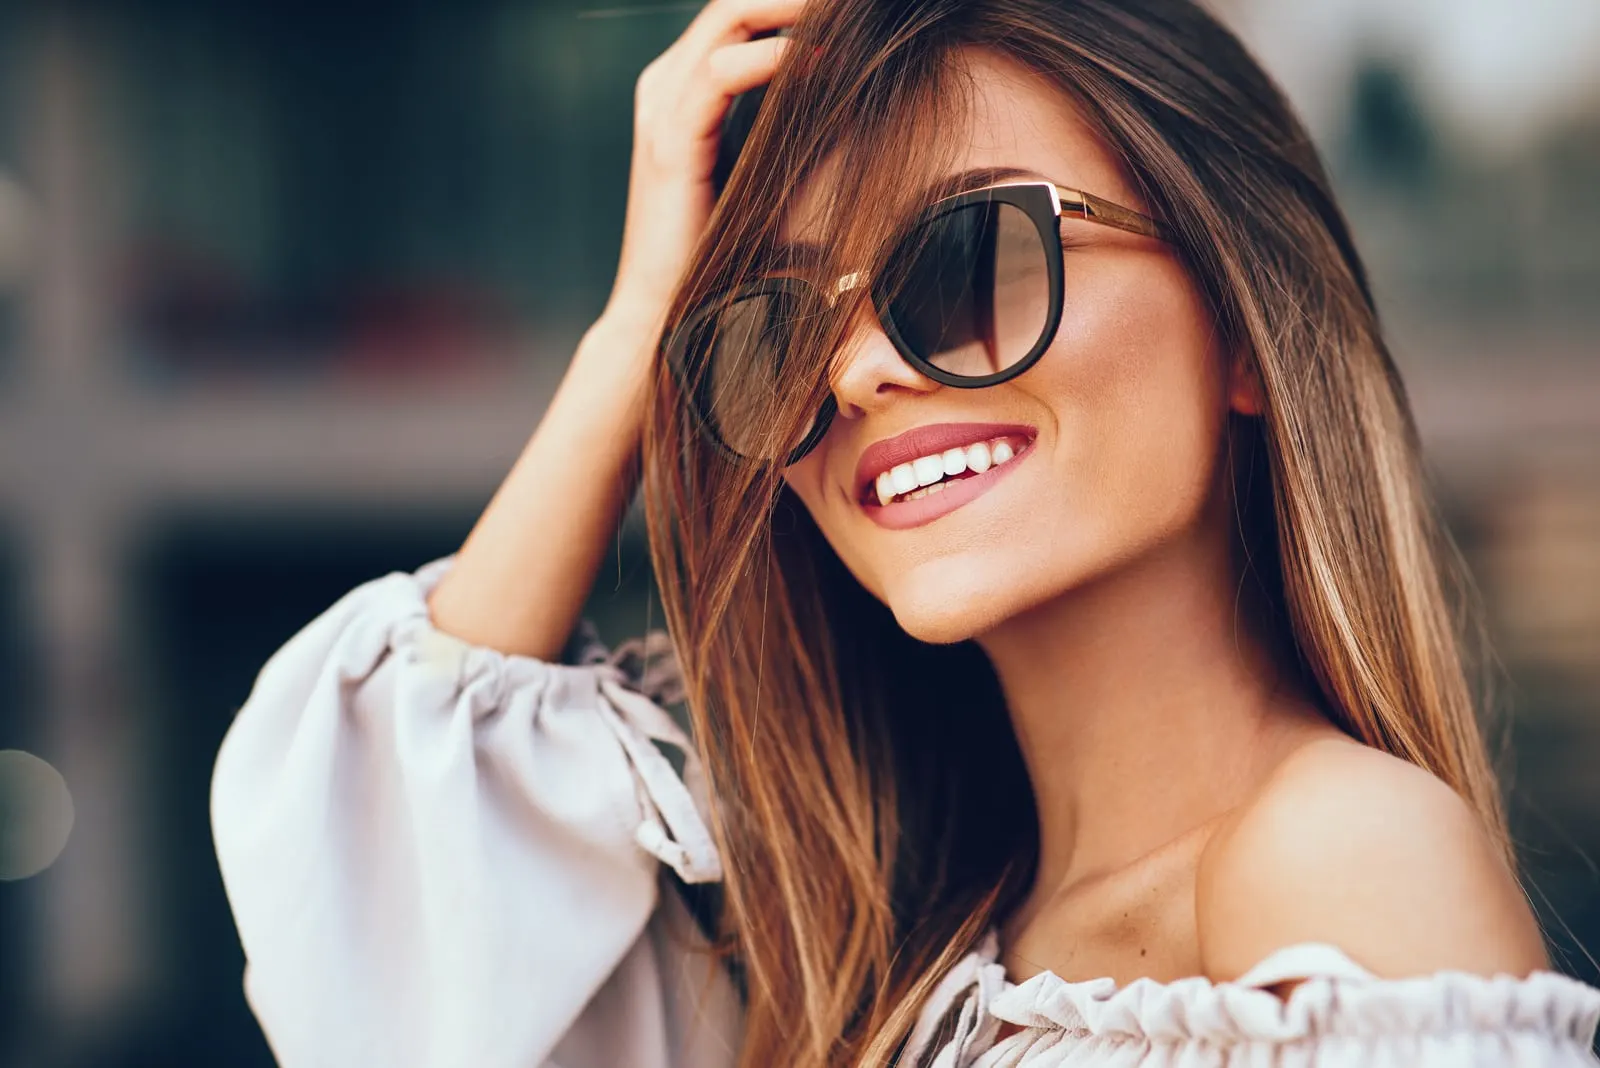 beautiful woman with sunglasses smiling